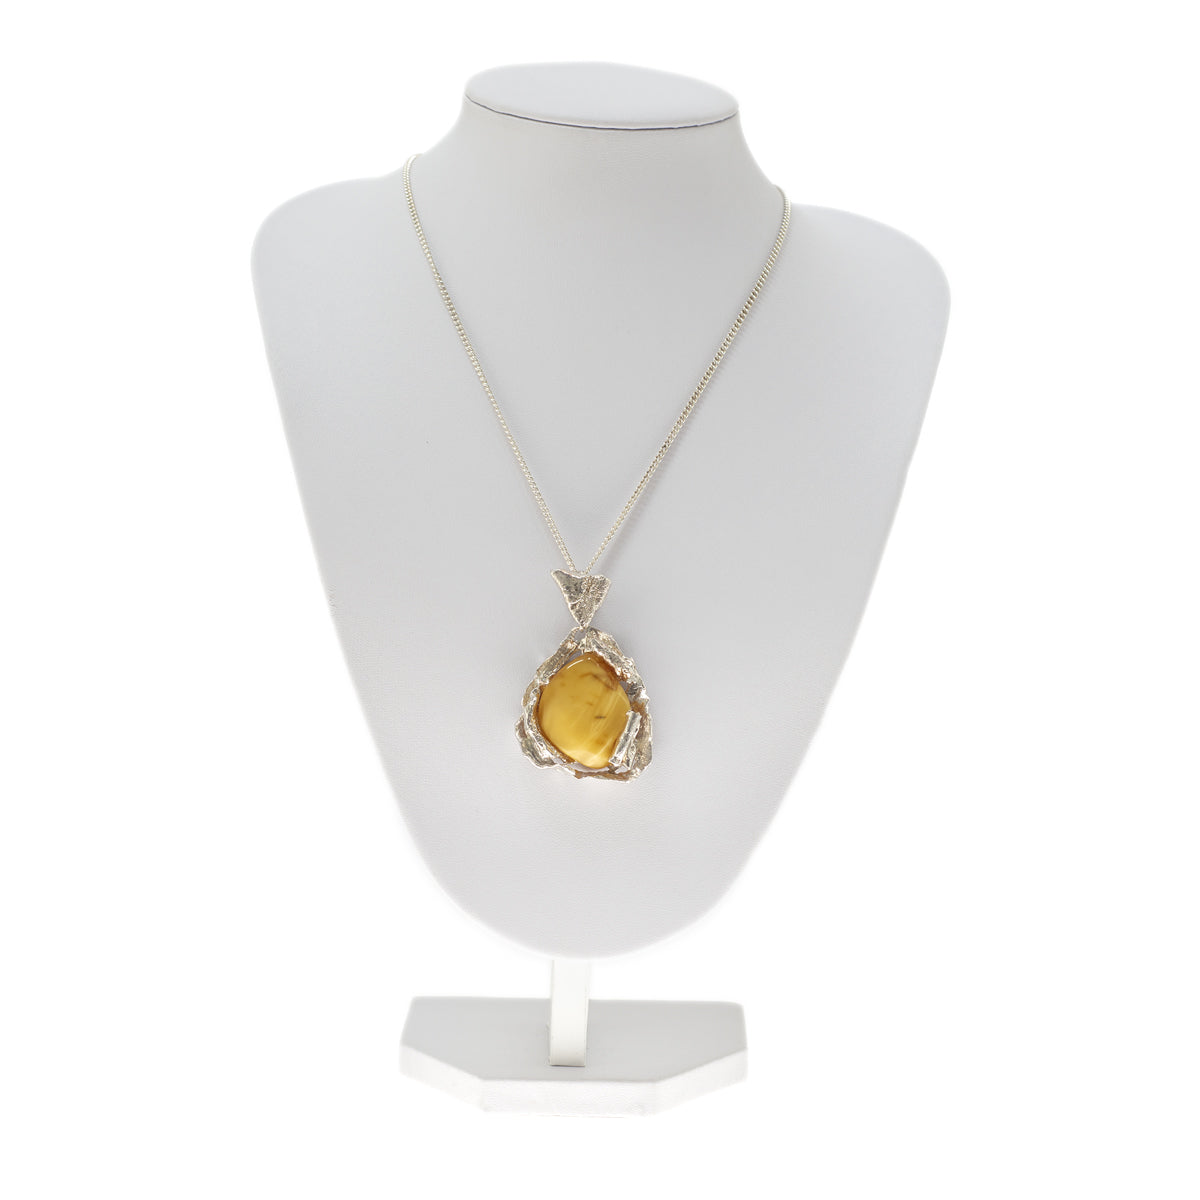 Artisan Hand Made Sterling Silver & Egg Yolk Amber Cabochon Pendant & Chain (A1297)